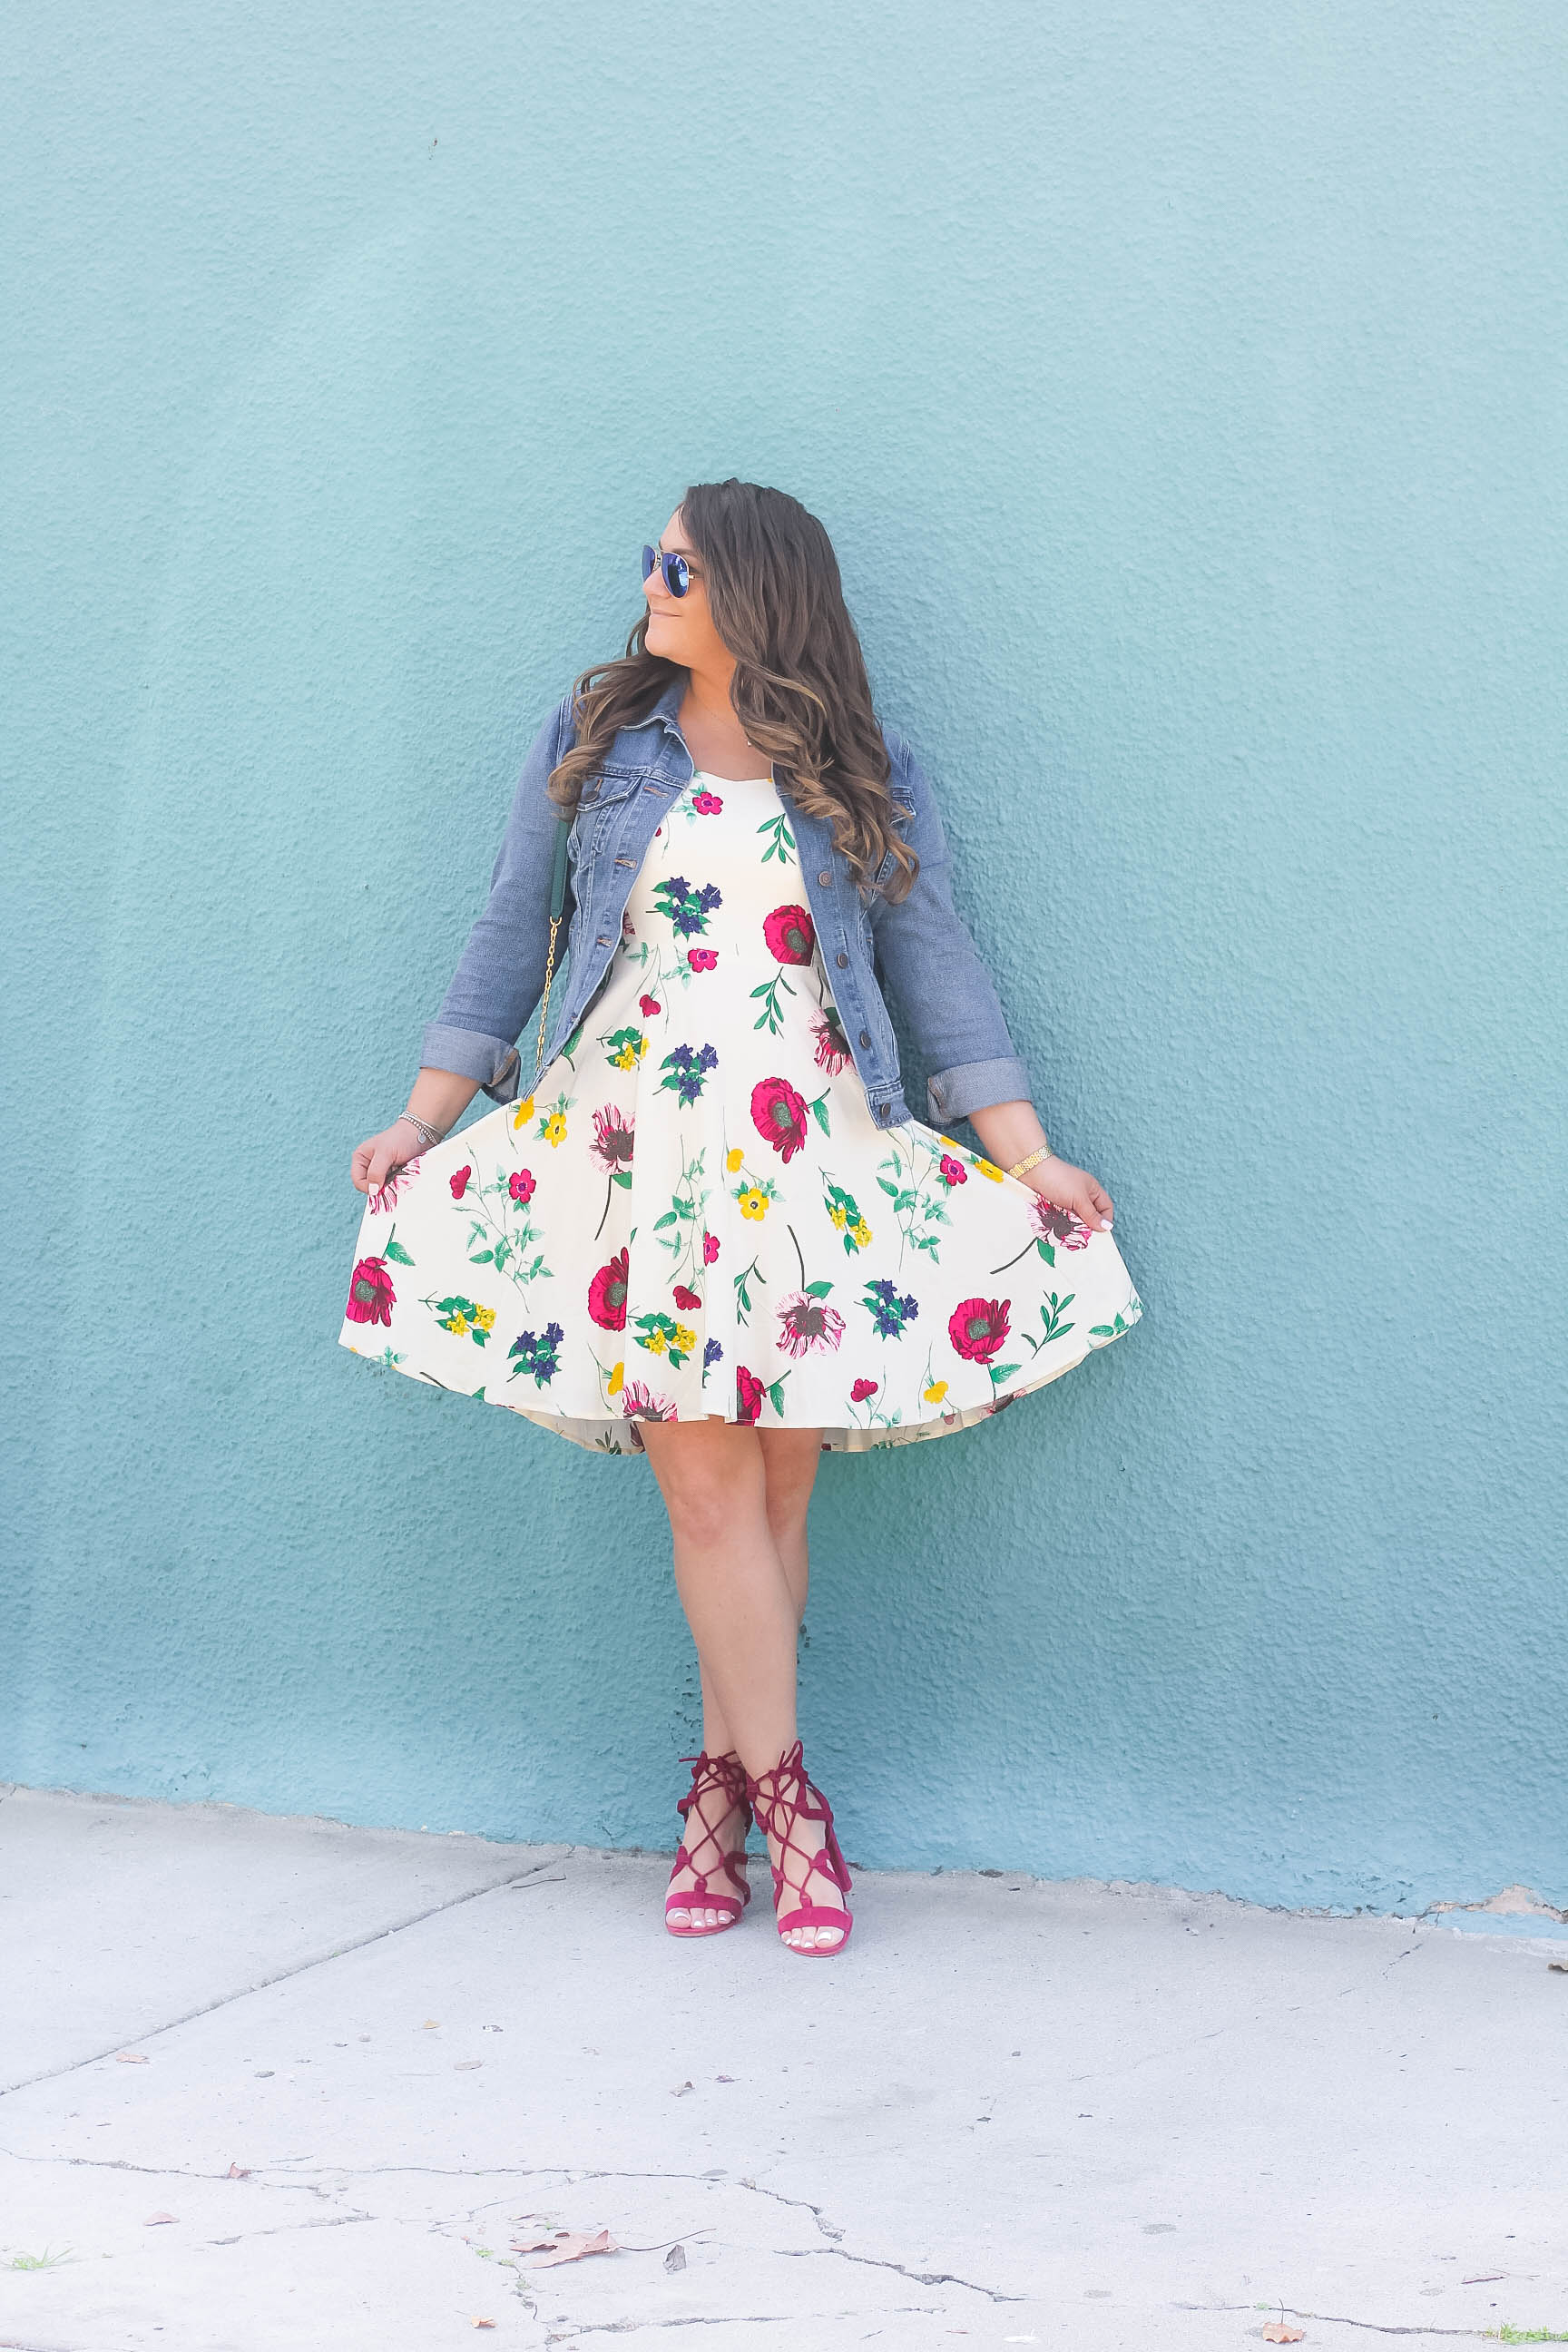 missyonmadison, missyonmadison instagram, melissa tierney, la blogger, style blogger, fashion blogger, fashion goals, outfit inspo, summer style, summer trends, floral dress, floral fit and flare dress, old navy, old navy cami dress, old navy floral dress, old navy denim jacket, denim jacket, raybans, rayban aviators, gianvito rossi, gianvito rossi lace up sandals, lace up sandals, vera bradley, vera bradley cross body bag, vera bradley emerald cross bodybag, curled hair, hair extensions, beauty blogger, outfits under $50,